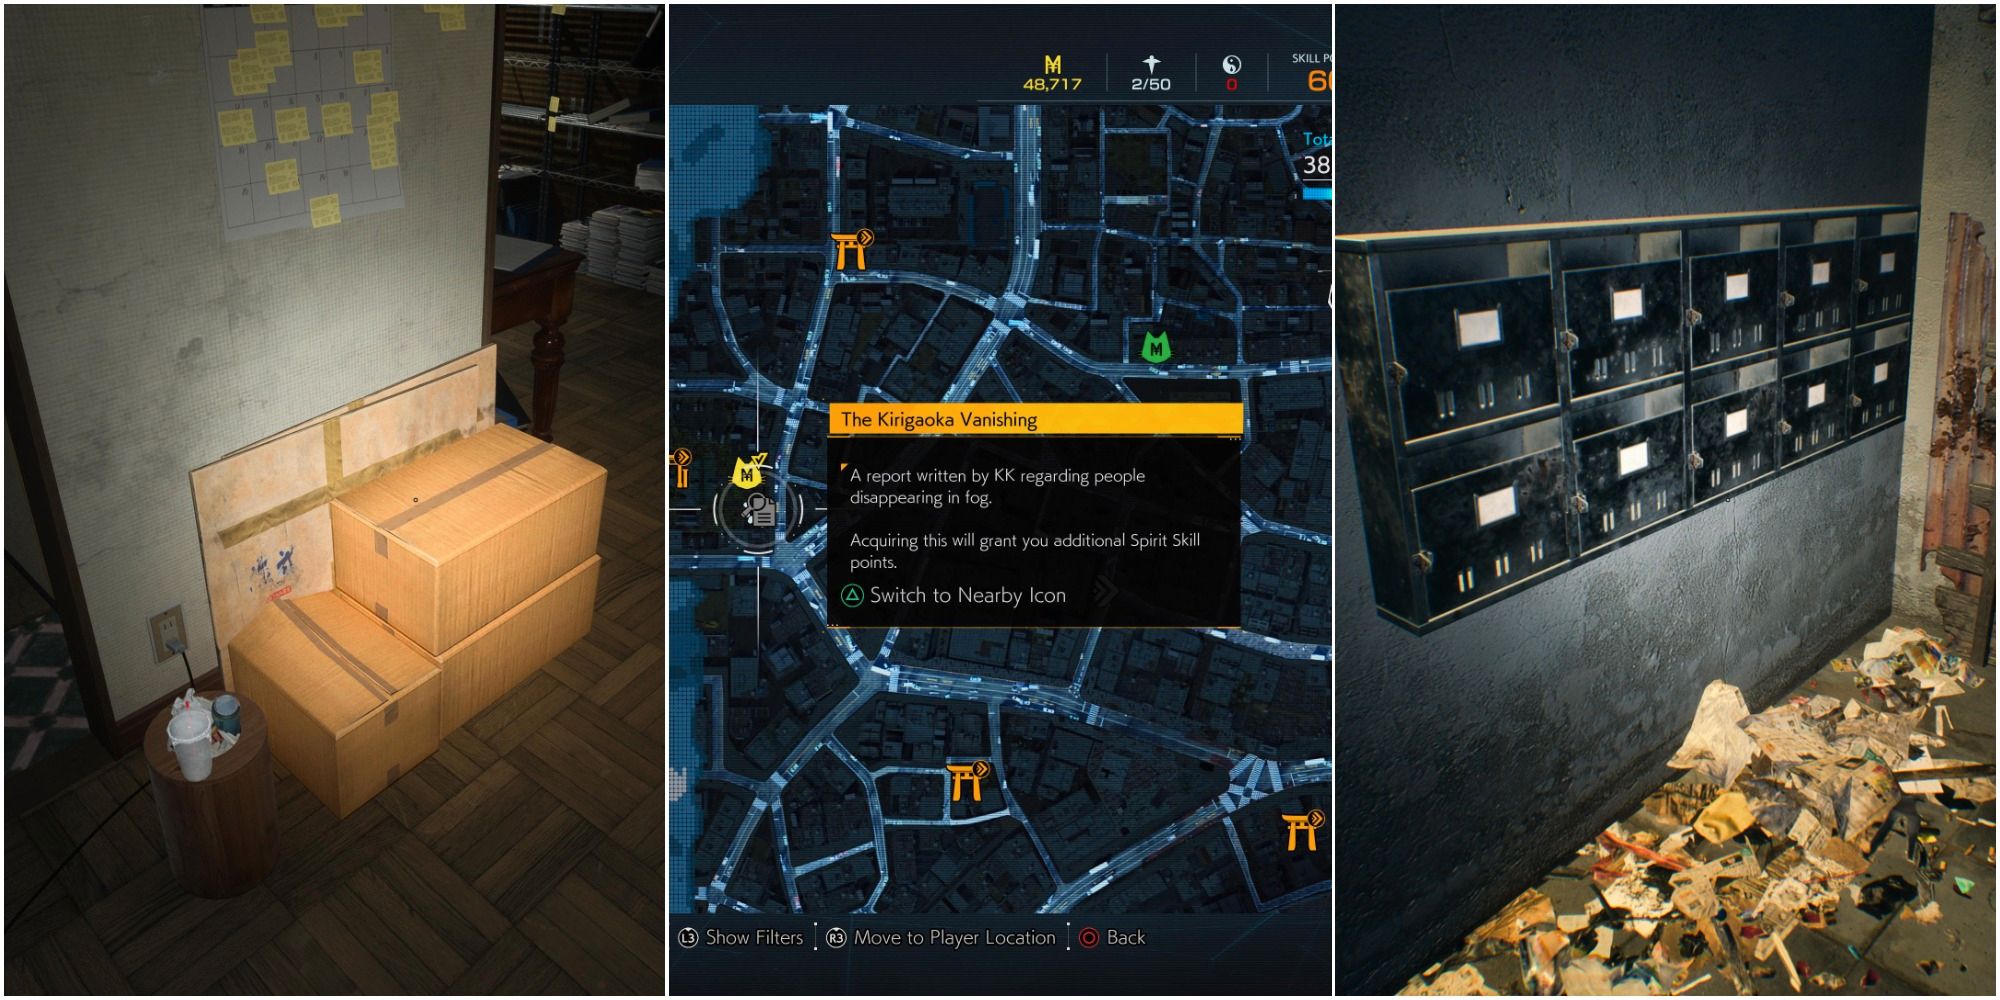 Ghostwire Tokyo Collage - KK's safehouse, world map, and letter boxes showing the location of Investigation Notes